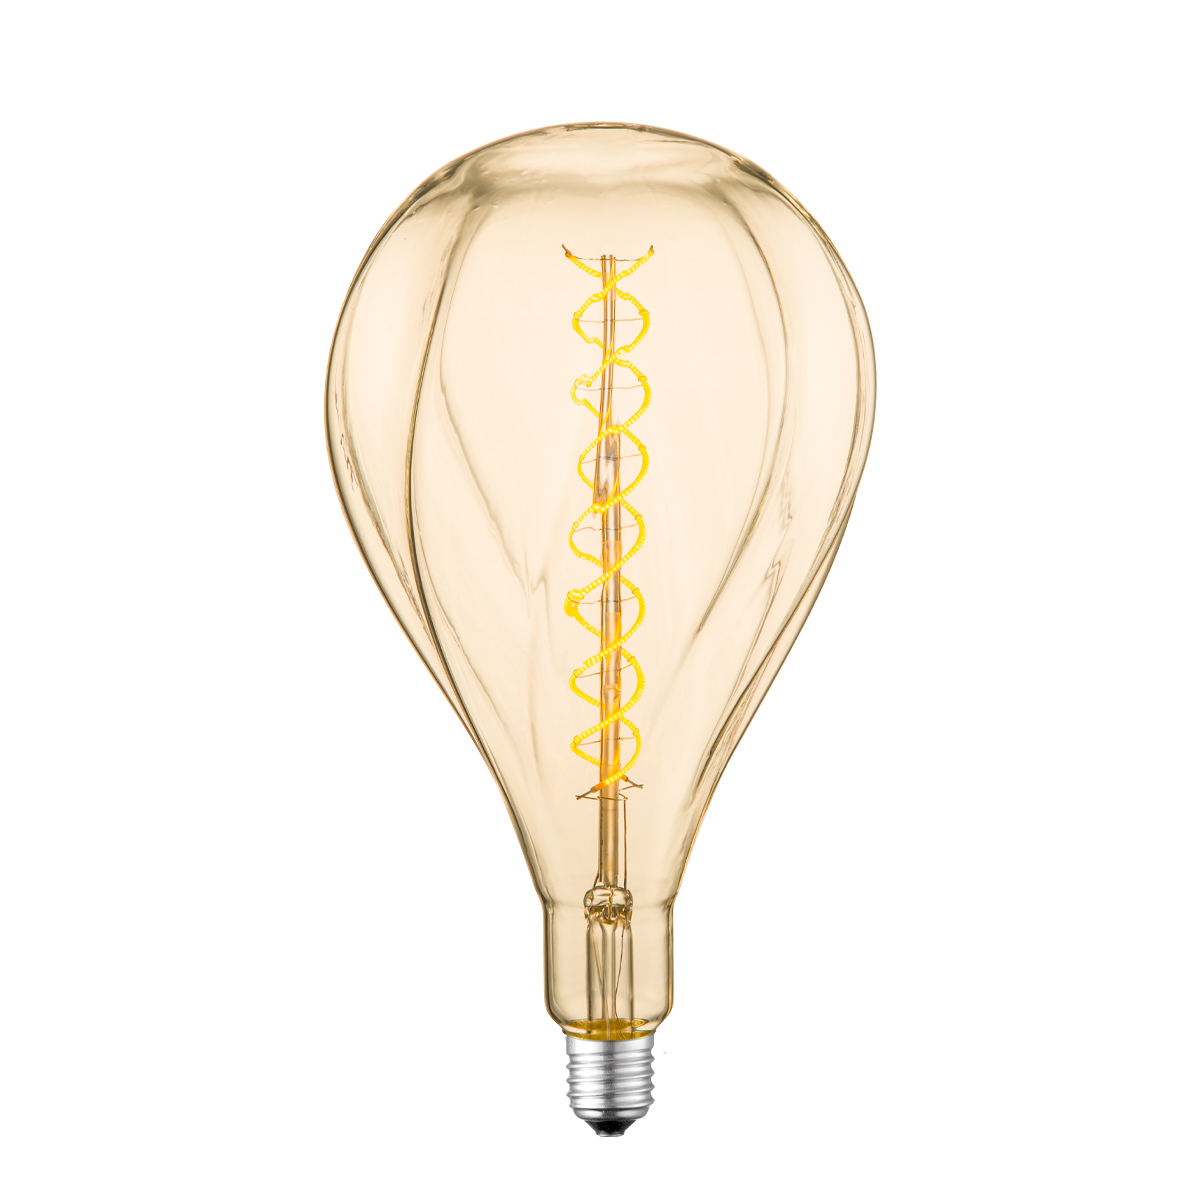 Tangla lighting - TLB-8103-06AM - LED Light Bulb Double Spiral filament - special 4W amber - large bubs - dimmable - E27